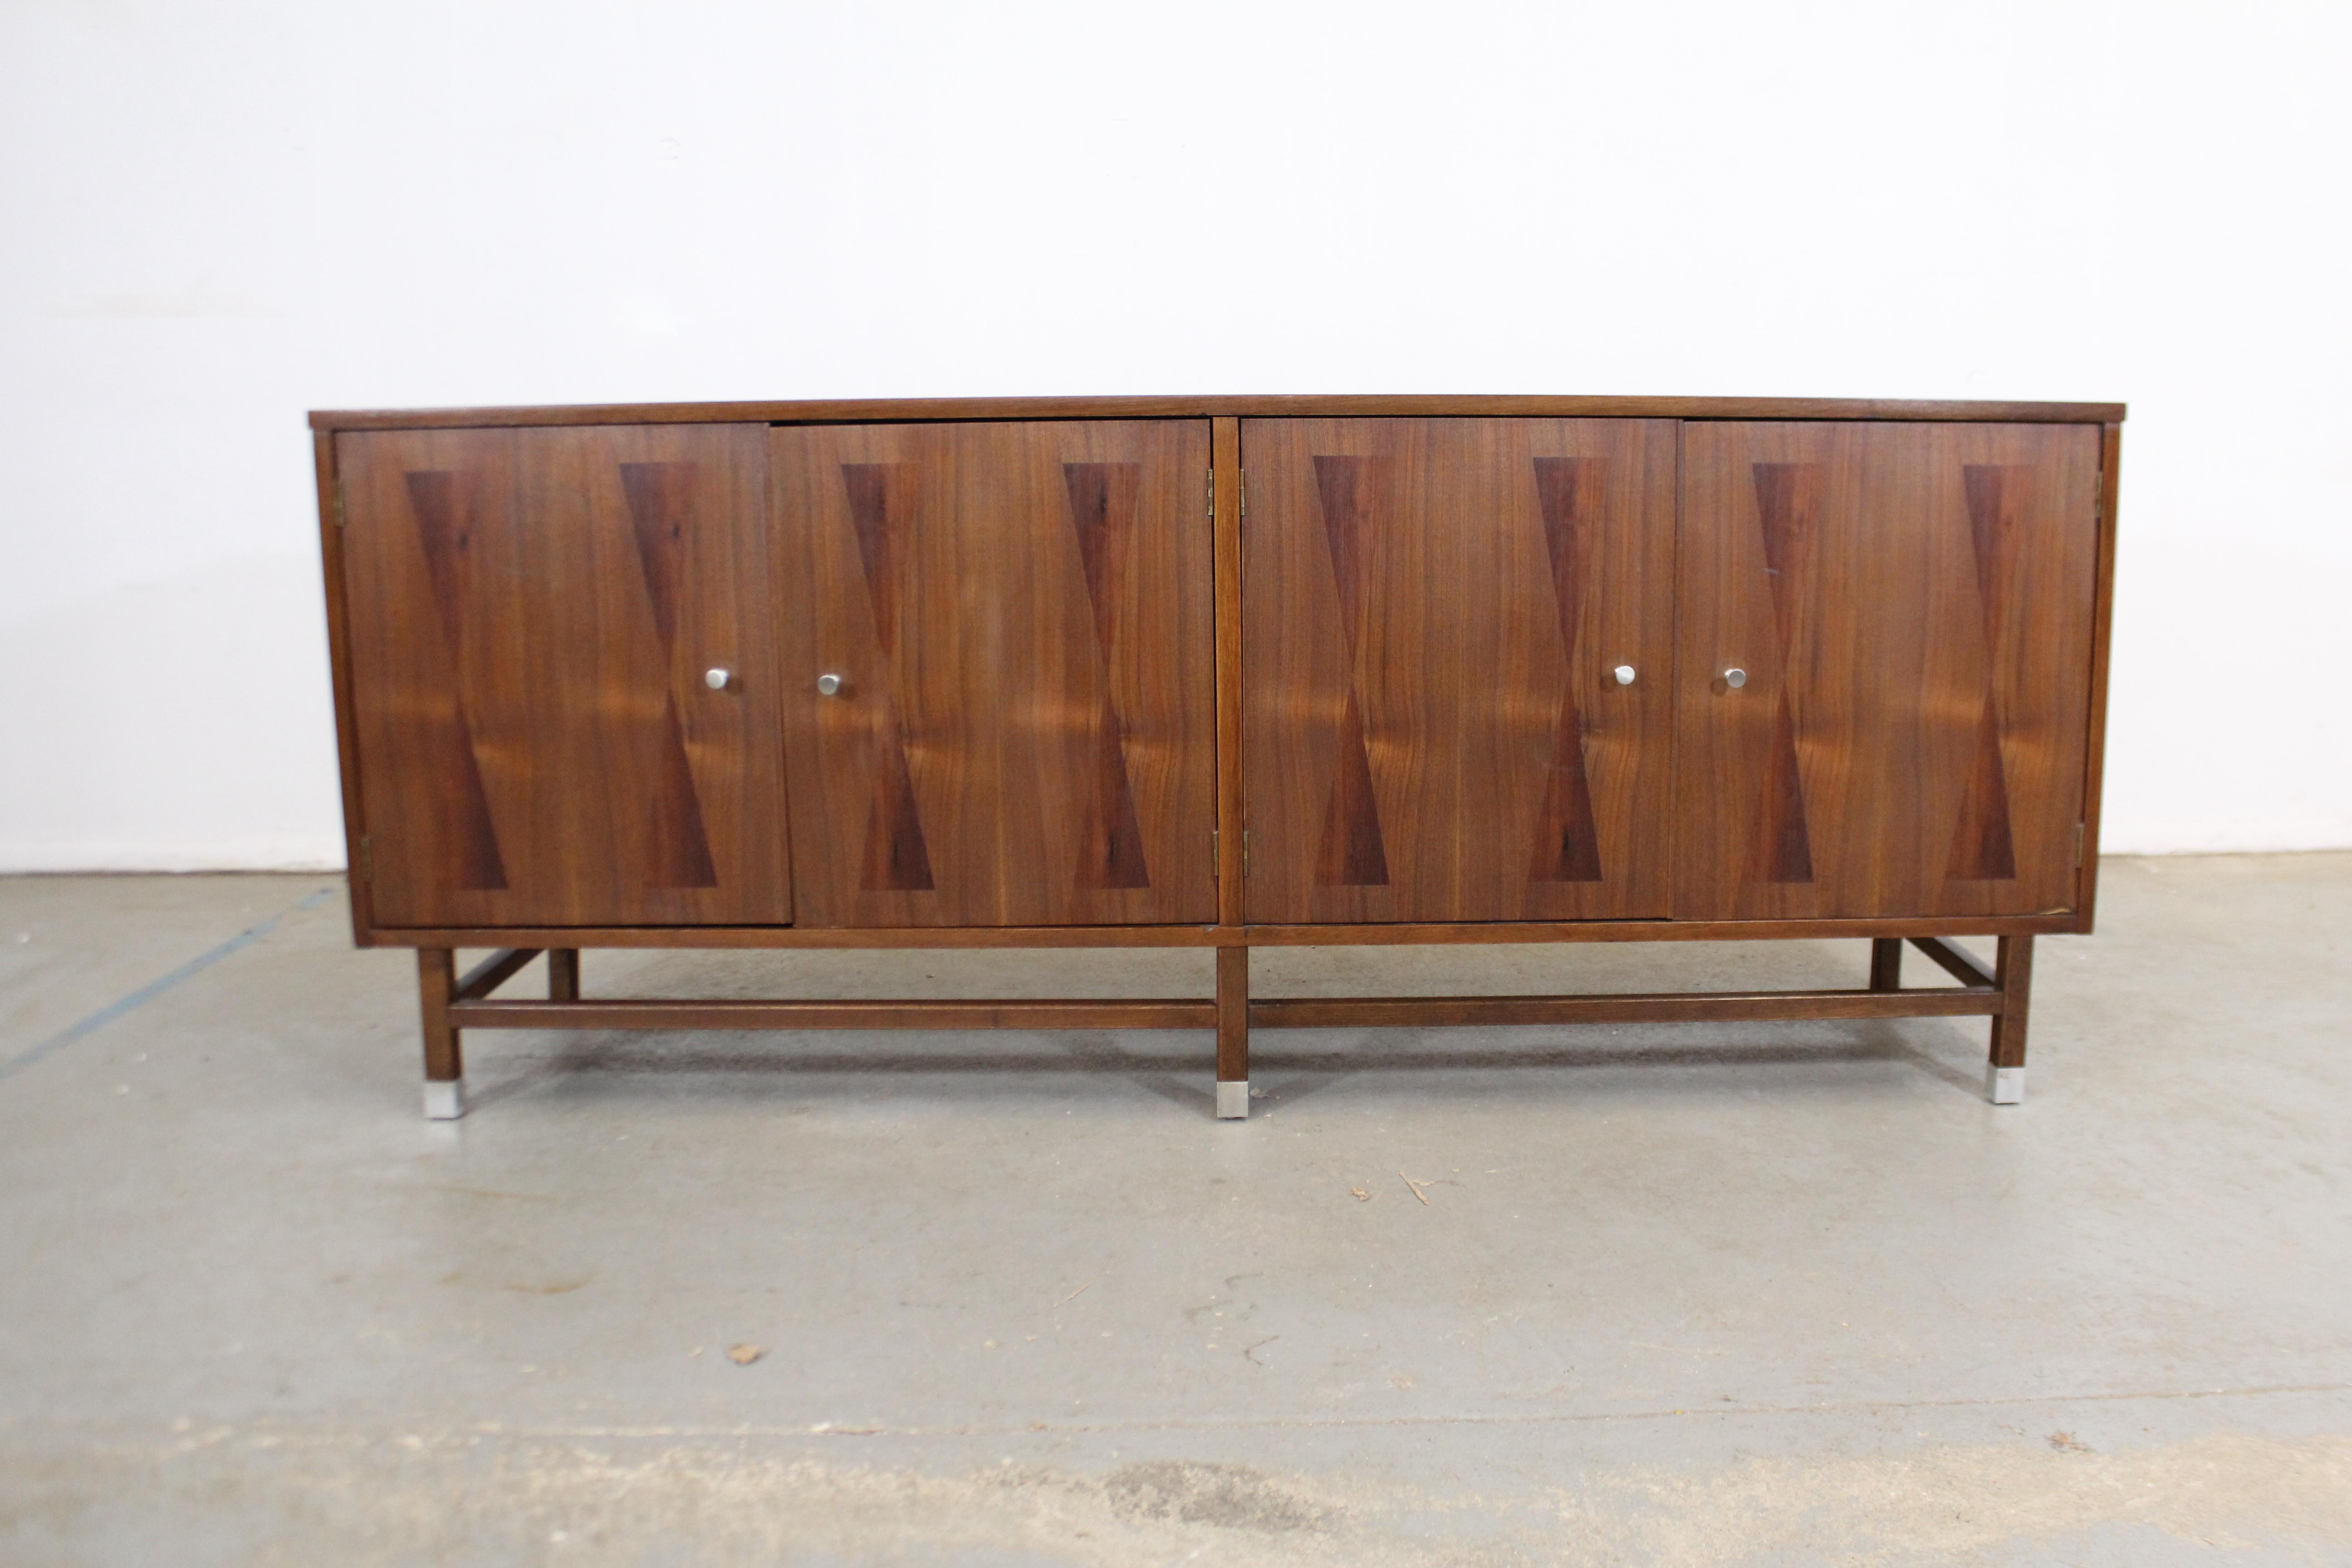 Offered is a vintage Mid-Century Modern walnut credenza with four parqueted doors. Includes inner shelving and three dovetailed drawers. One drawer has dividers with felt lining for silverware. It has been refinished and its pulls have been replaced